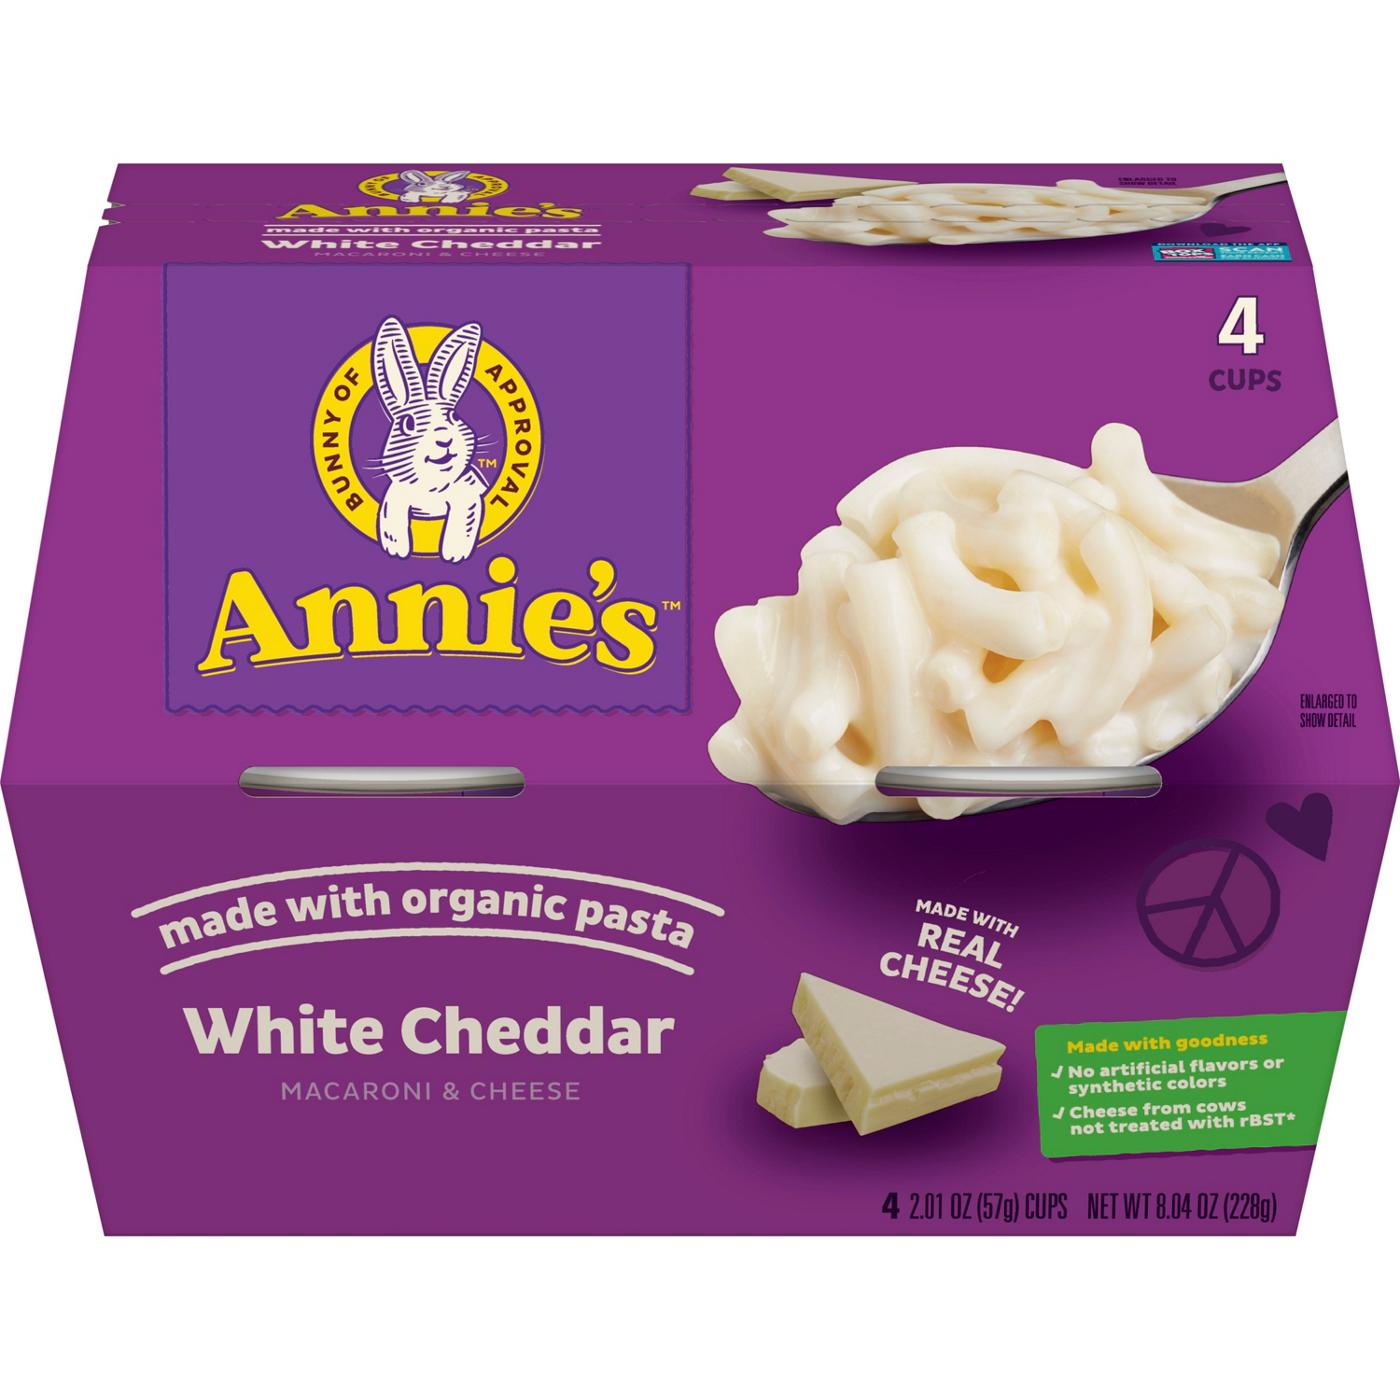 Annie's White Cheddar Macaroni And Cheese Cups; image 1 of 2